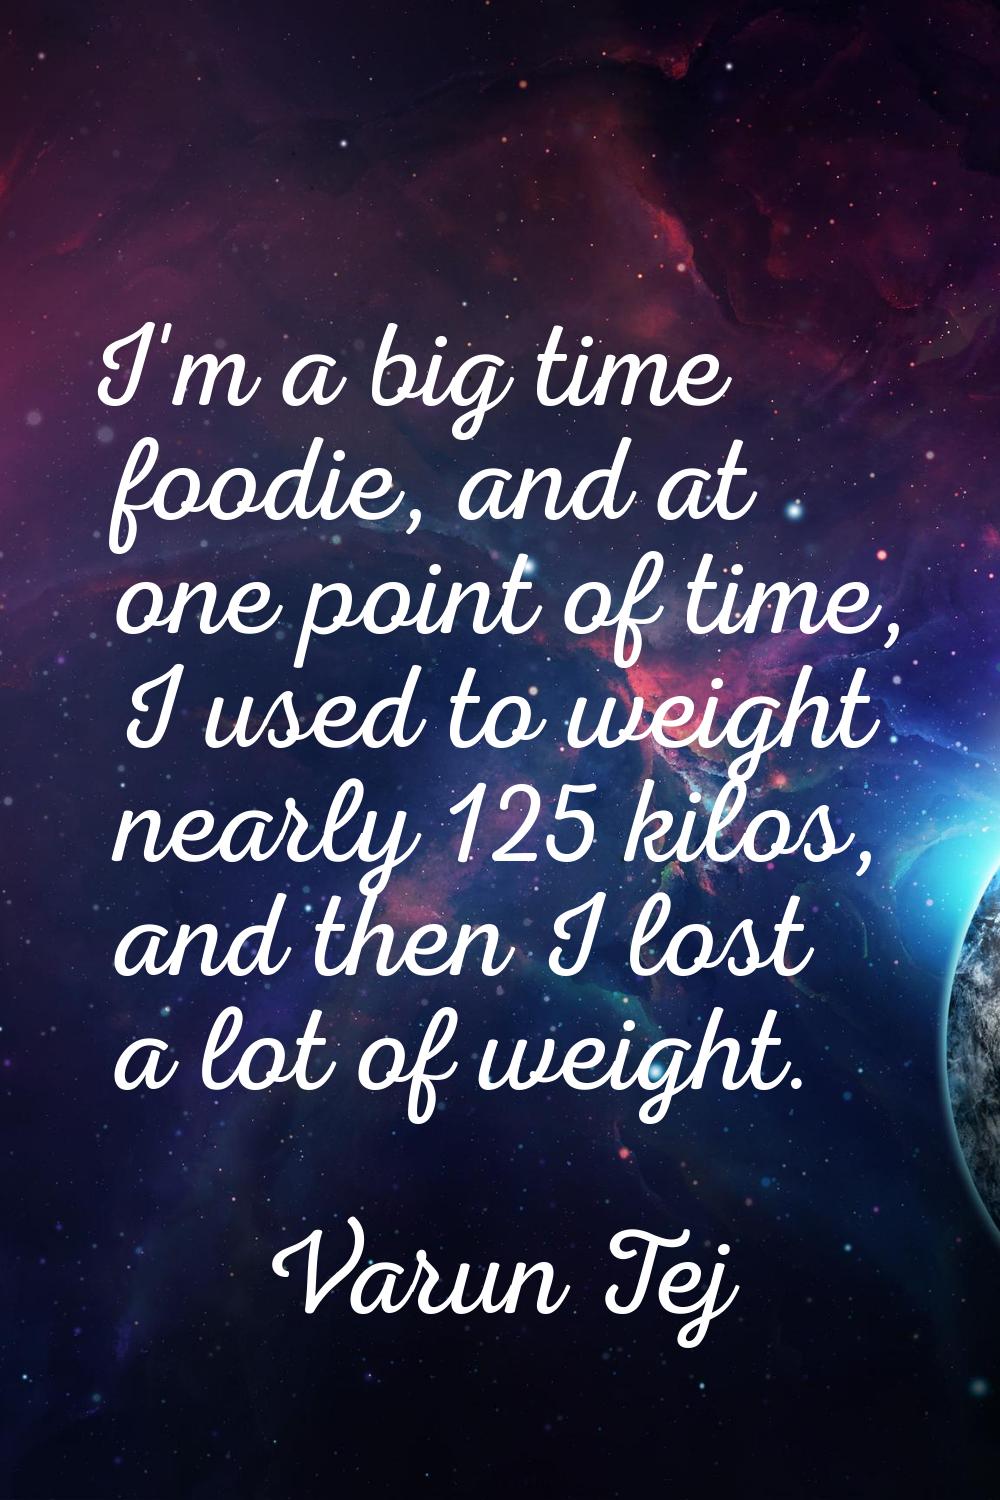 I'm a big time foodie, and at one point of time, I used to weight nearly 125 kilos, and then I lost